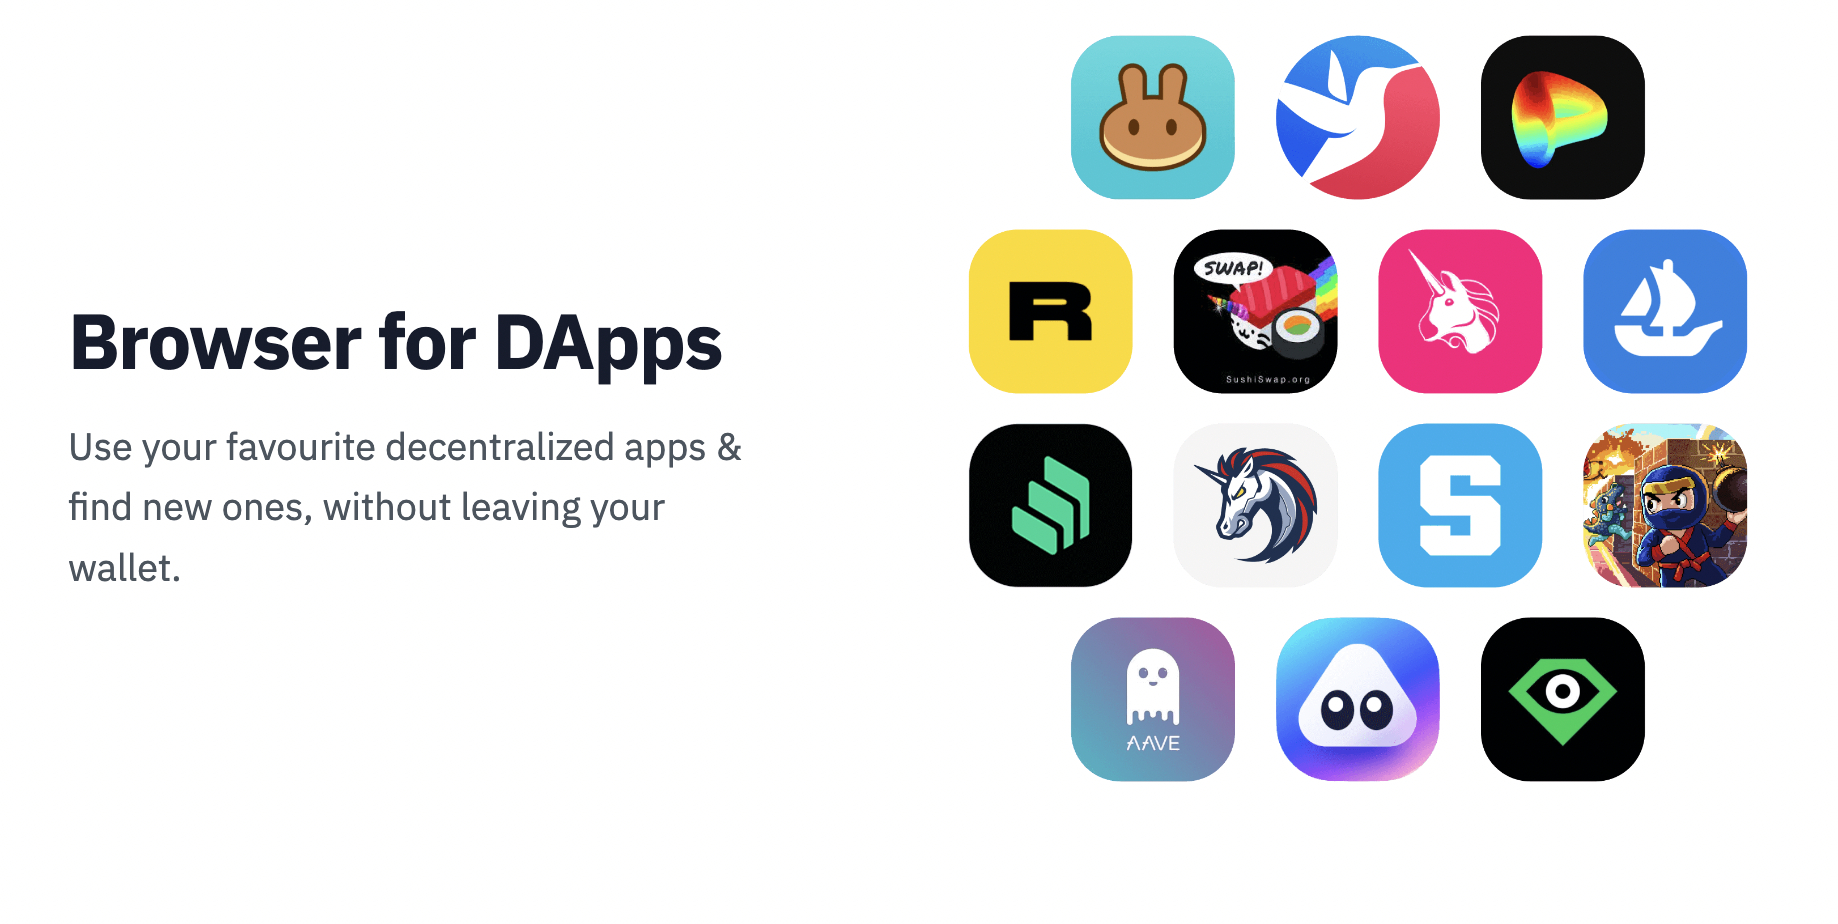 Browser for DApps list